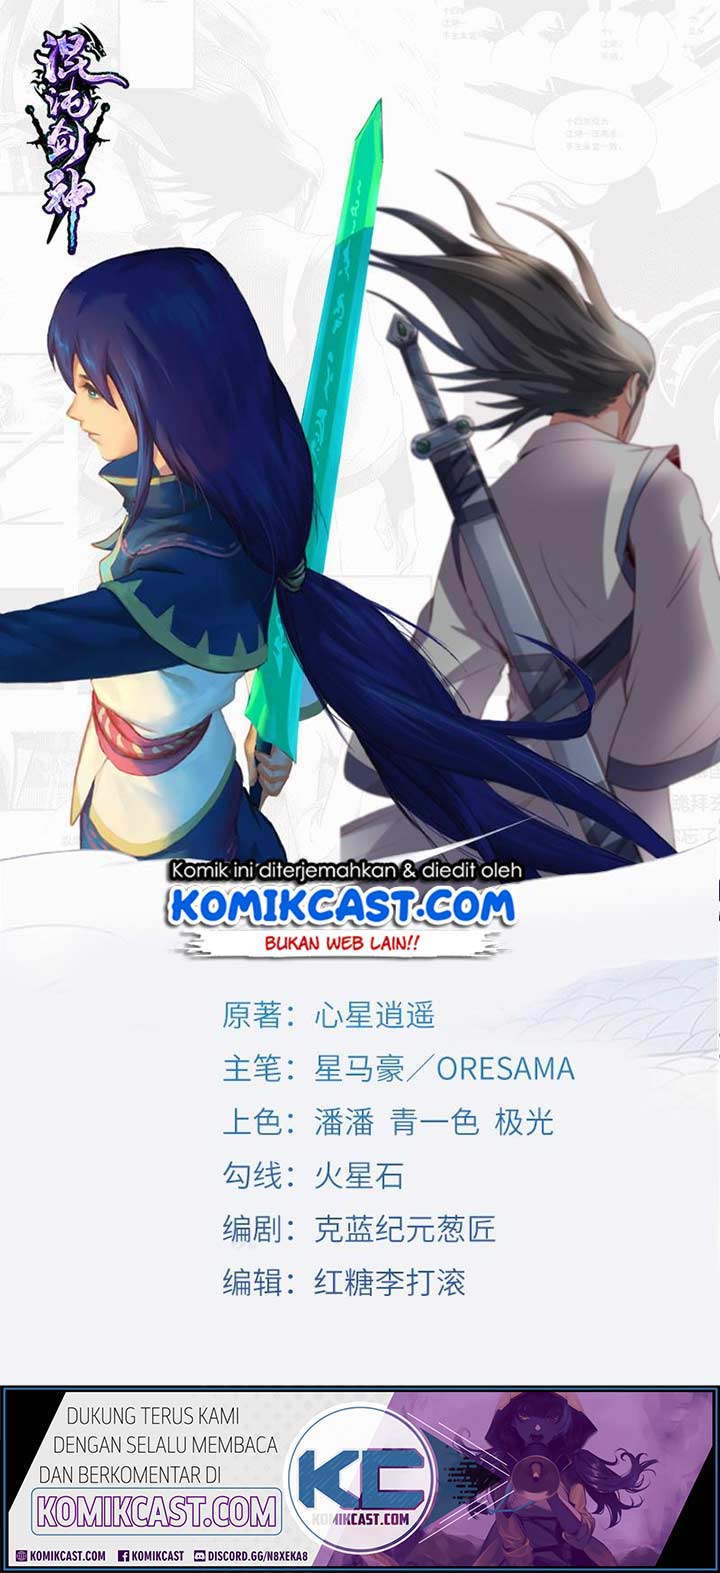 Chaotic Sword God Chapter 148